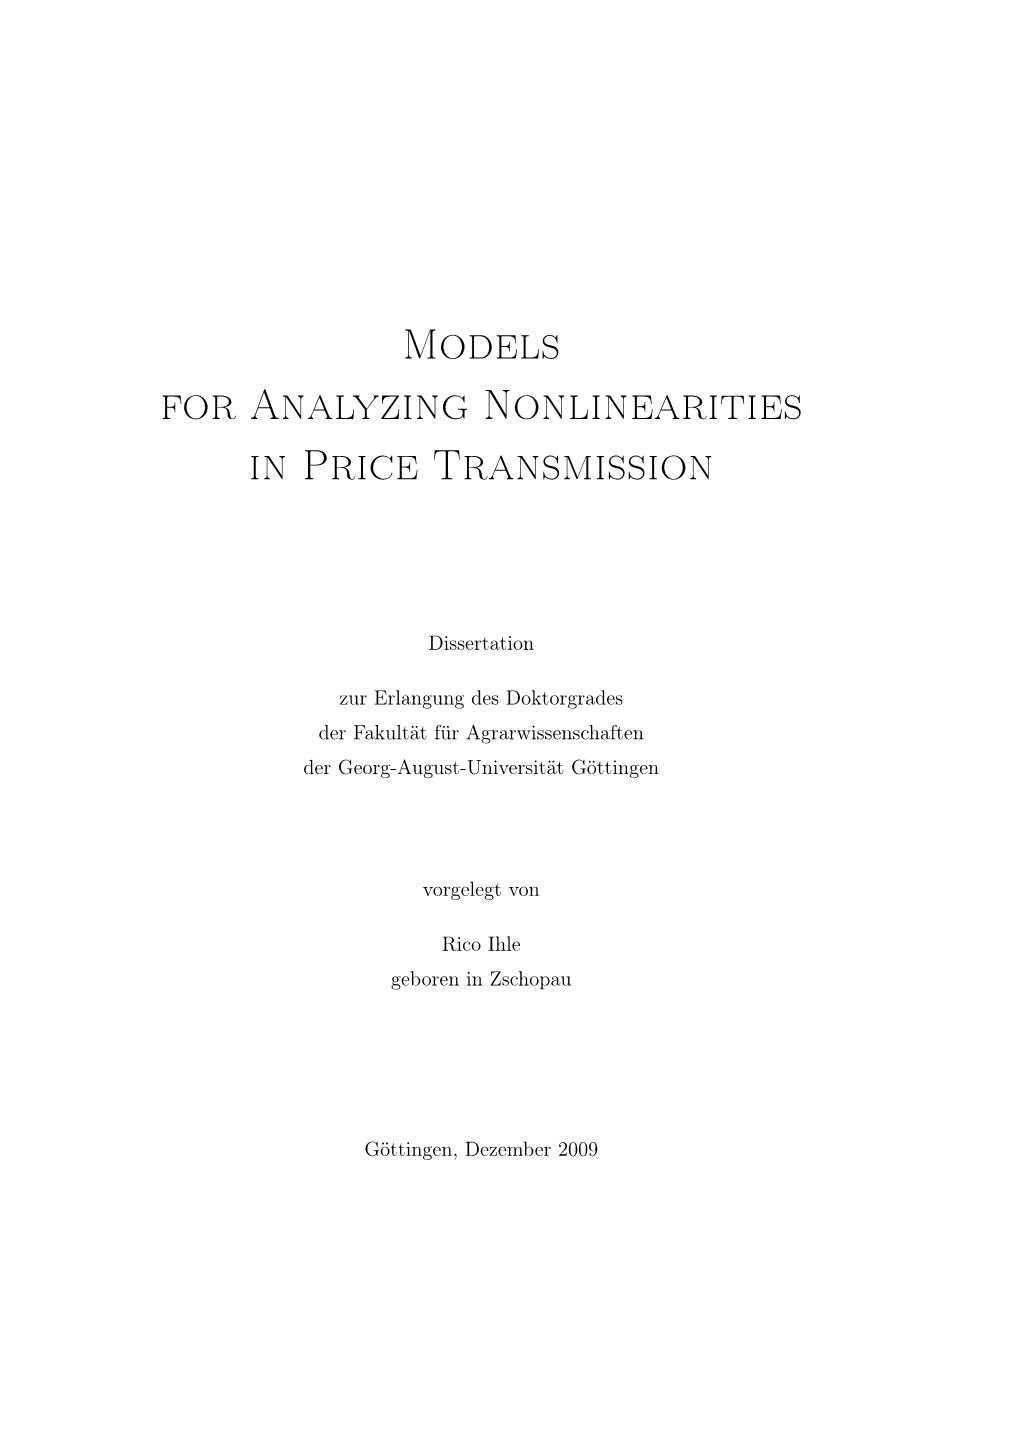 Models for Analyzing Nonlinearities in Spatial Price Transmission